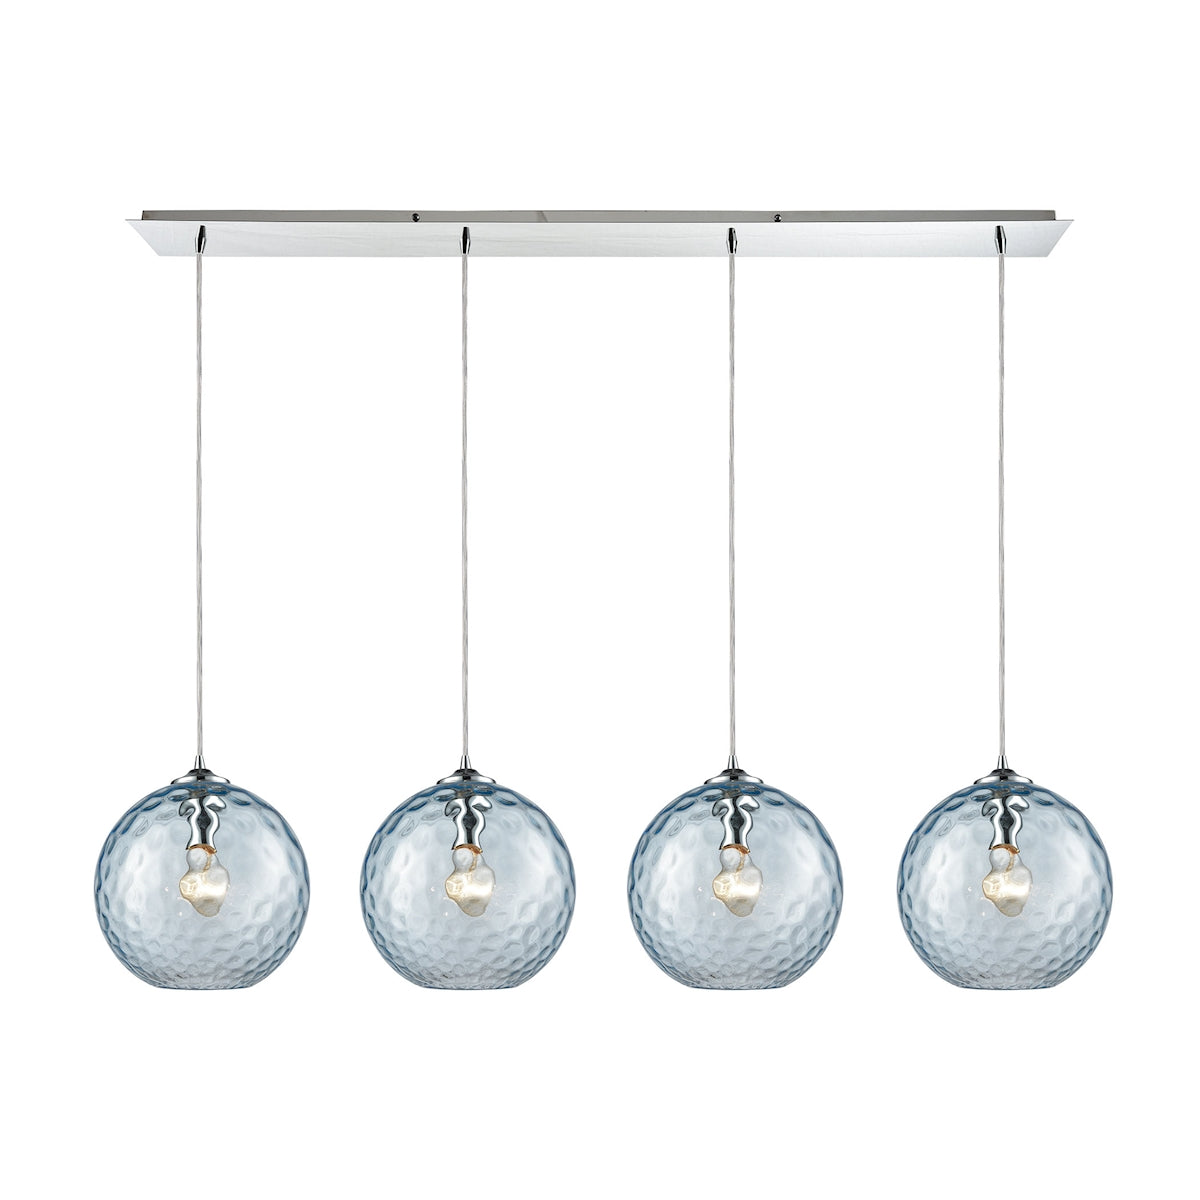 ELK Lighting 31380/4LP-AQ Watersphere 4-Light Linear Pendant Fixture in Chrome with Hammered Aqua Glass